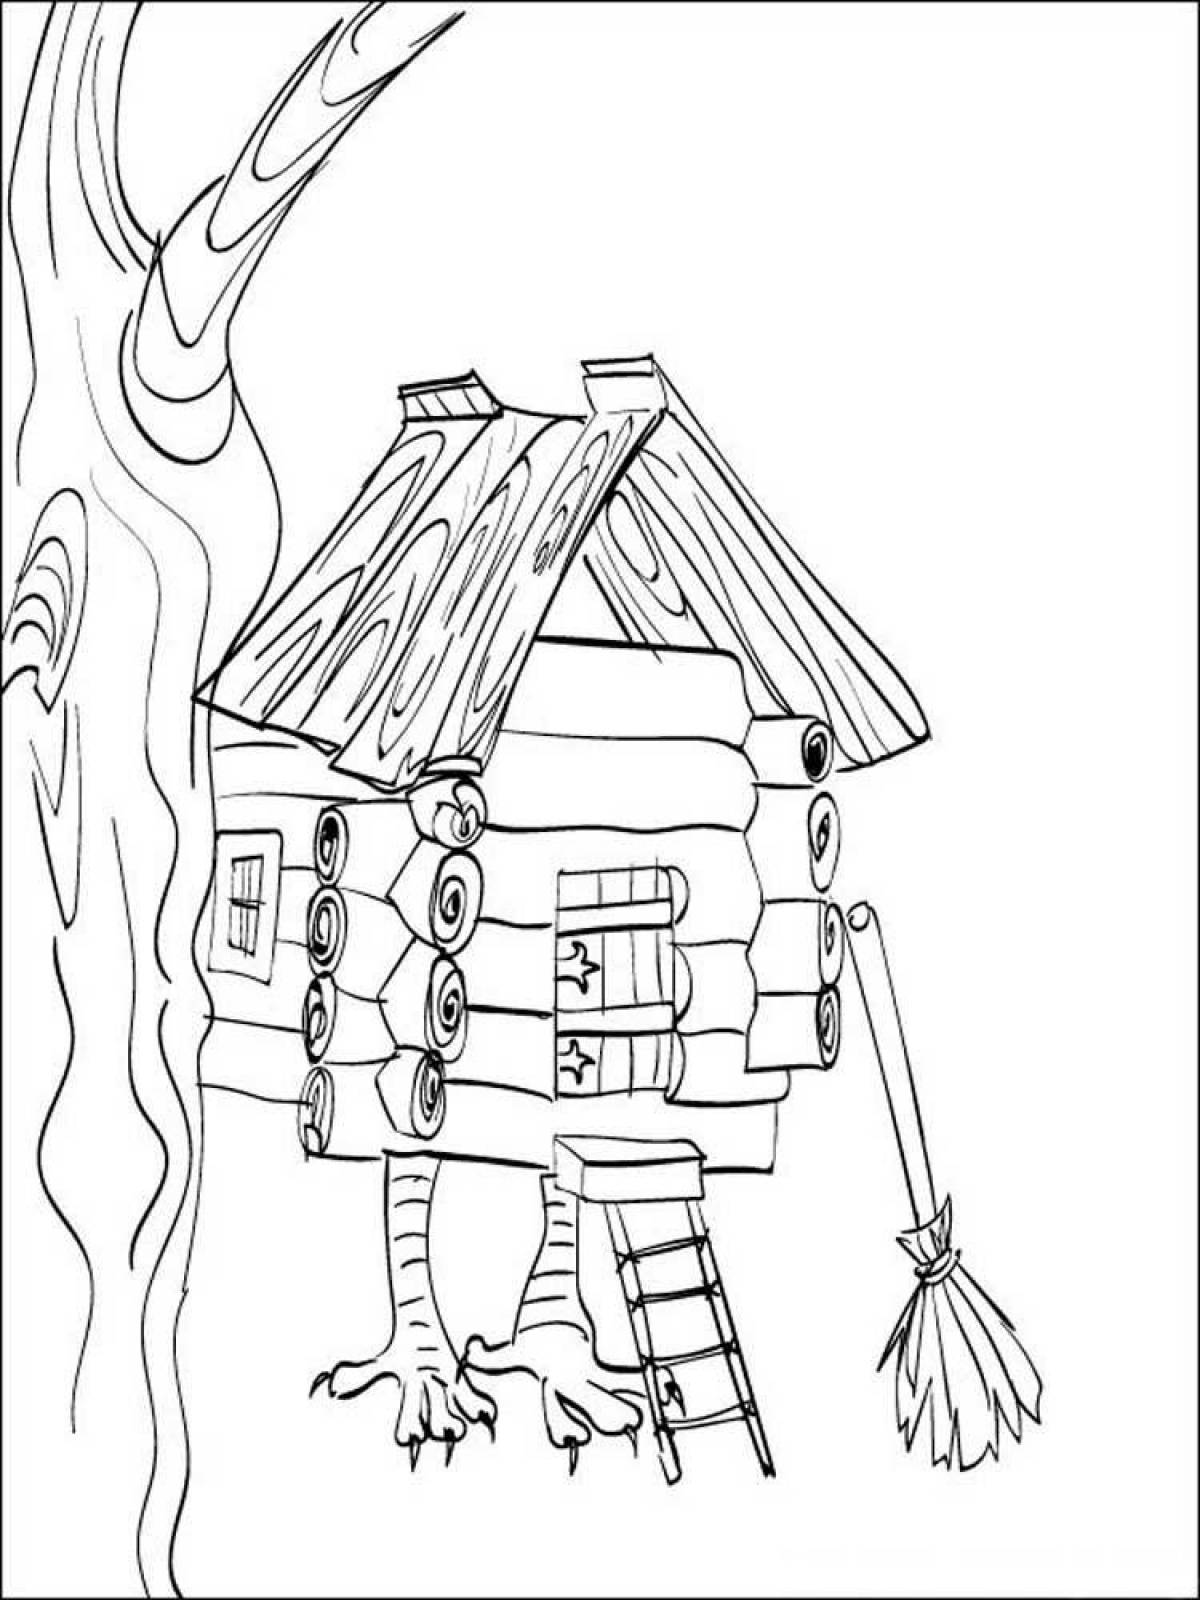 Coloring page funny hut